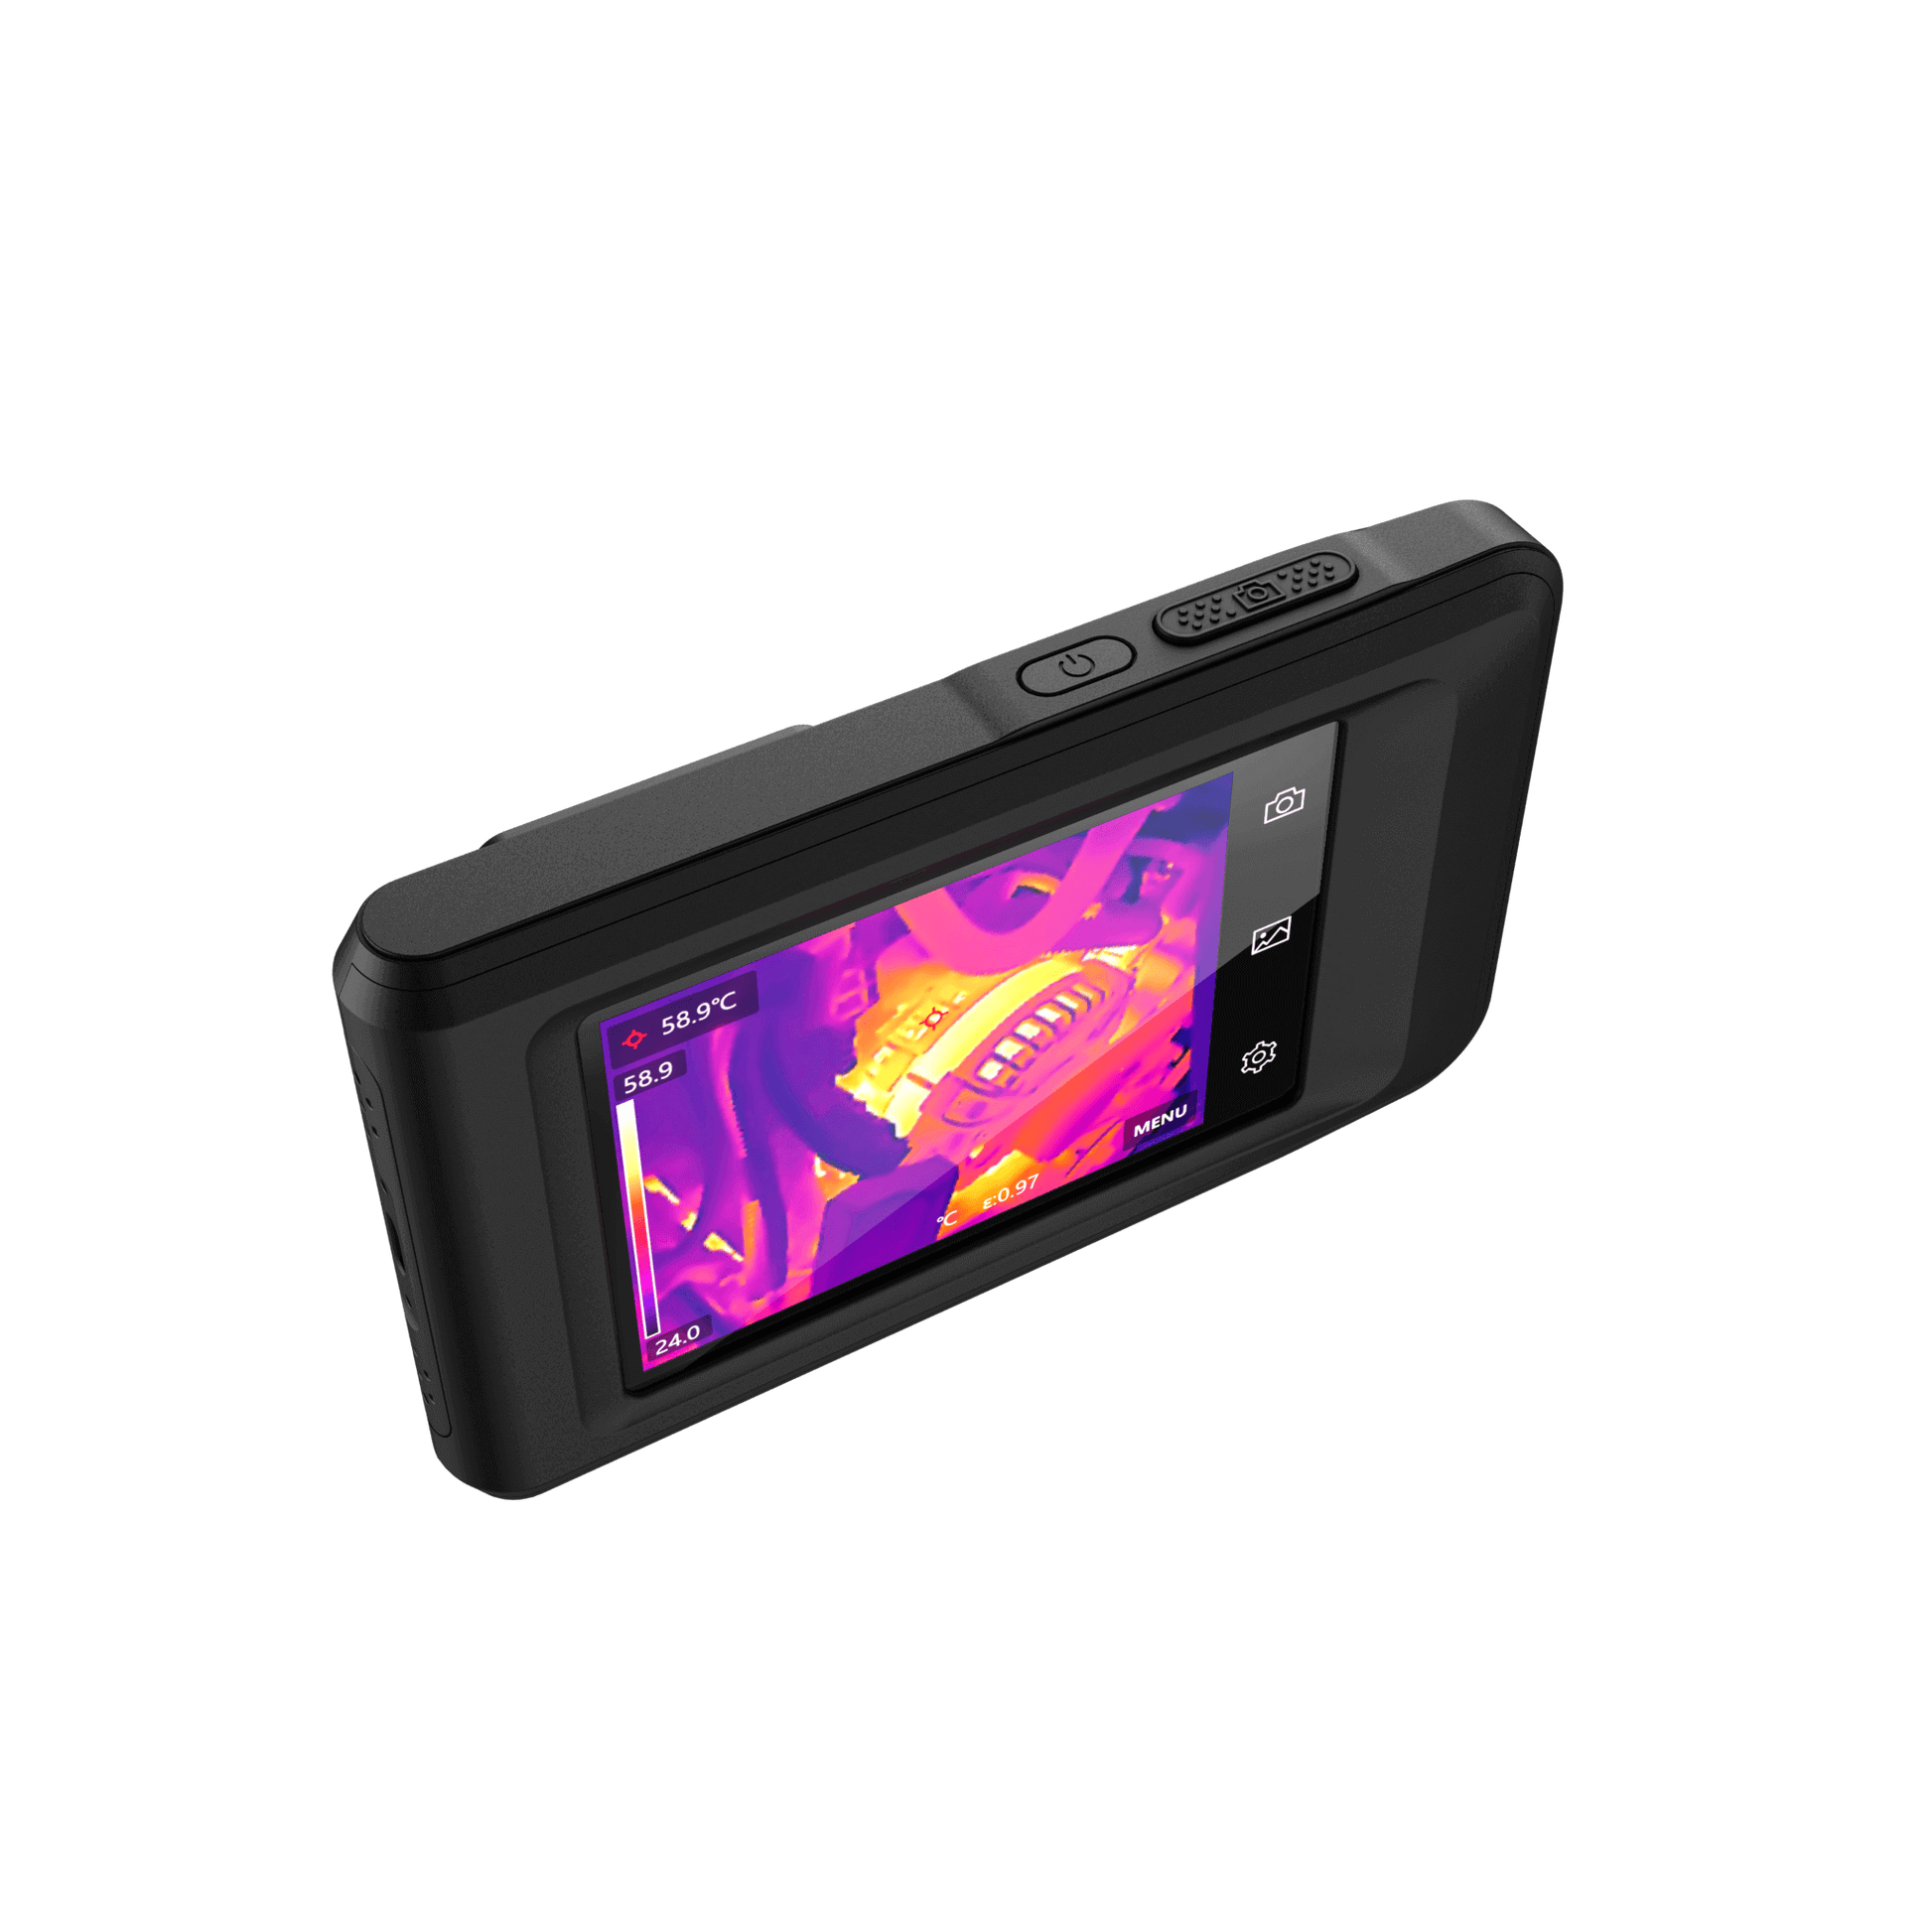 HikMicro Pocket 1 Handheld Thermography Camera Screen view from above showing power and image capture buttons